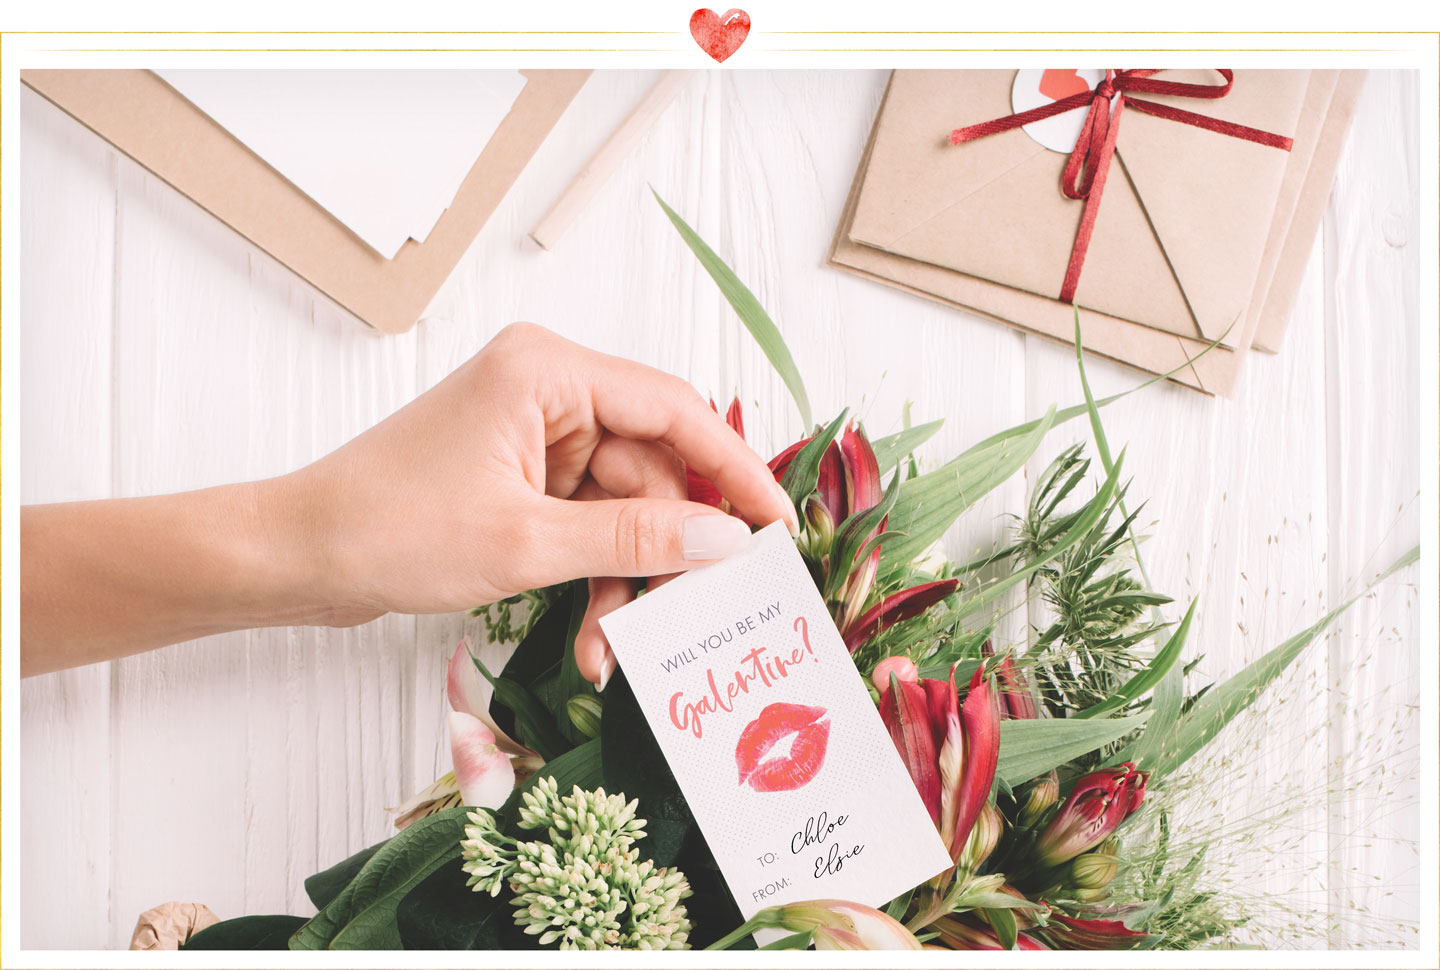 Valentine's Day “Galentine” Gift Idea and Printable Tag - Girl